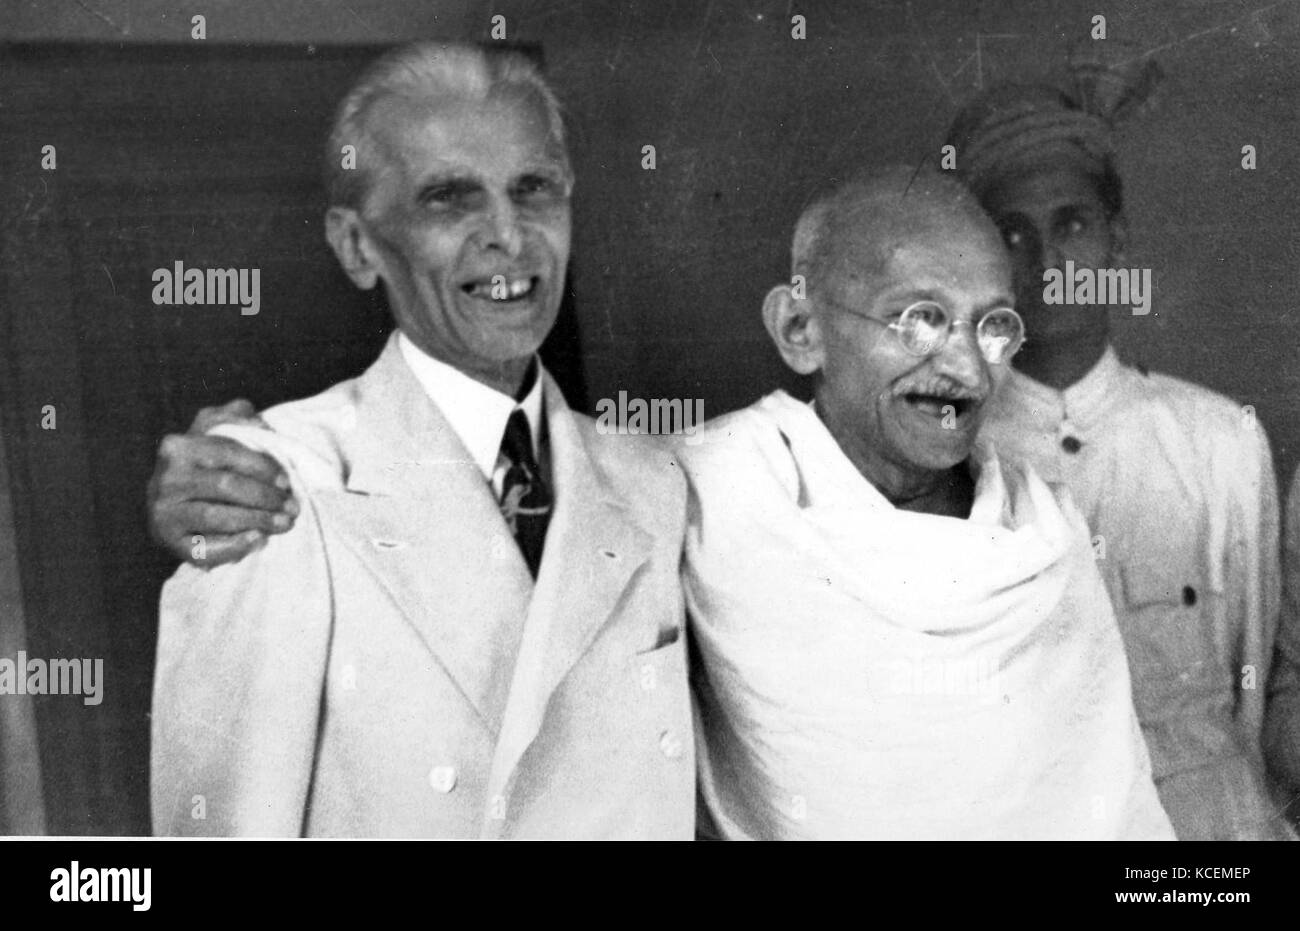 Muhammad Ali Jinnah (1876 –1948) lawyer, politician, and the founder of Pakistan. with Mahatma Gandhi in 1946.  Jinnah served as leader of the All-India Muslim League from 1913 until Pakistan's creation on 14 August 1947, and then as Pakistan's first Governor-General until his death. Mohandas Gandhi (1869 – 1948) was the preeminent leader of the Indian independence movement in British-ruled India. Stock Photo